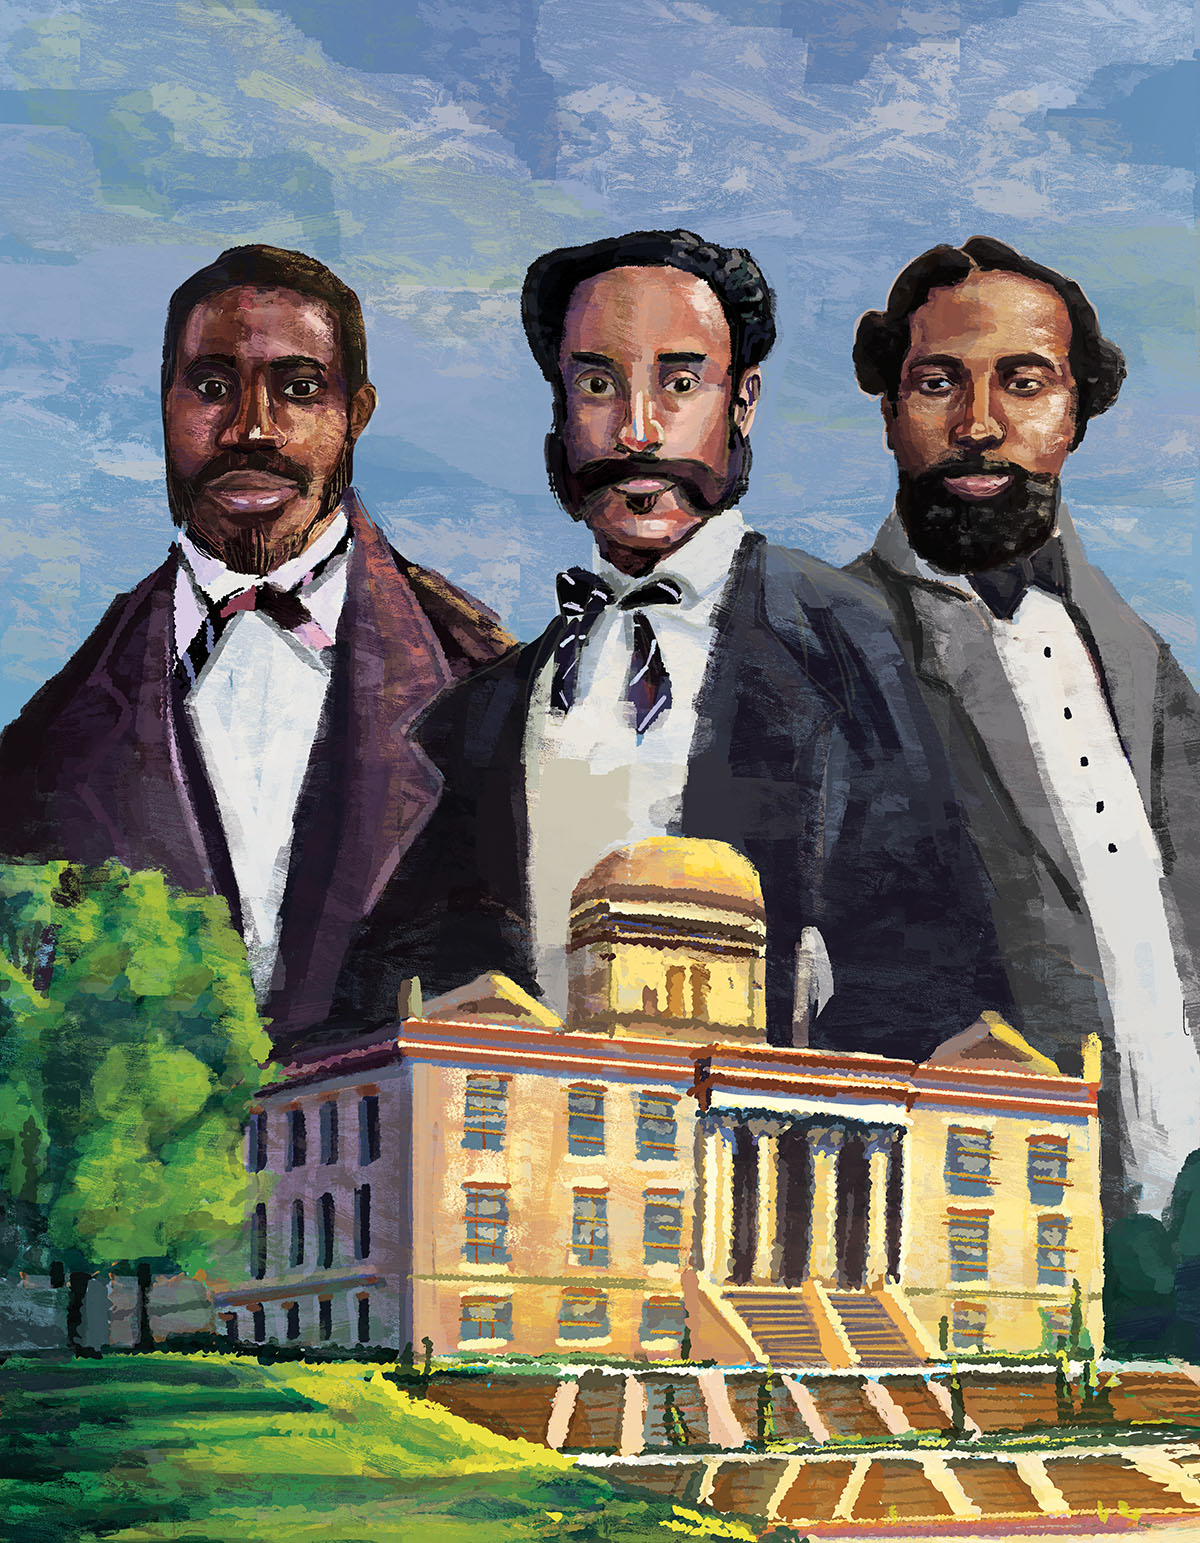 An illustration showing three men in suits above the Texas capitol